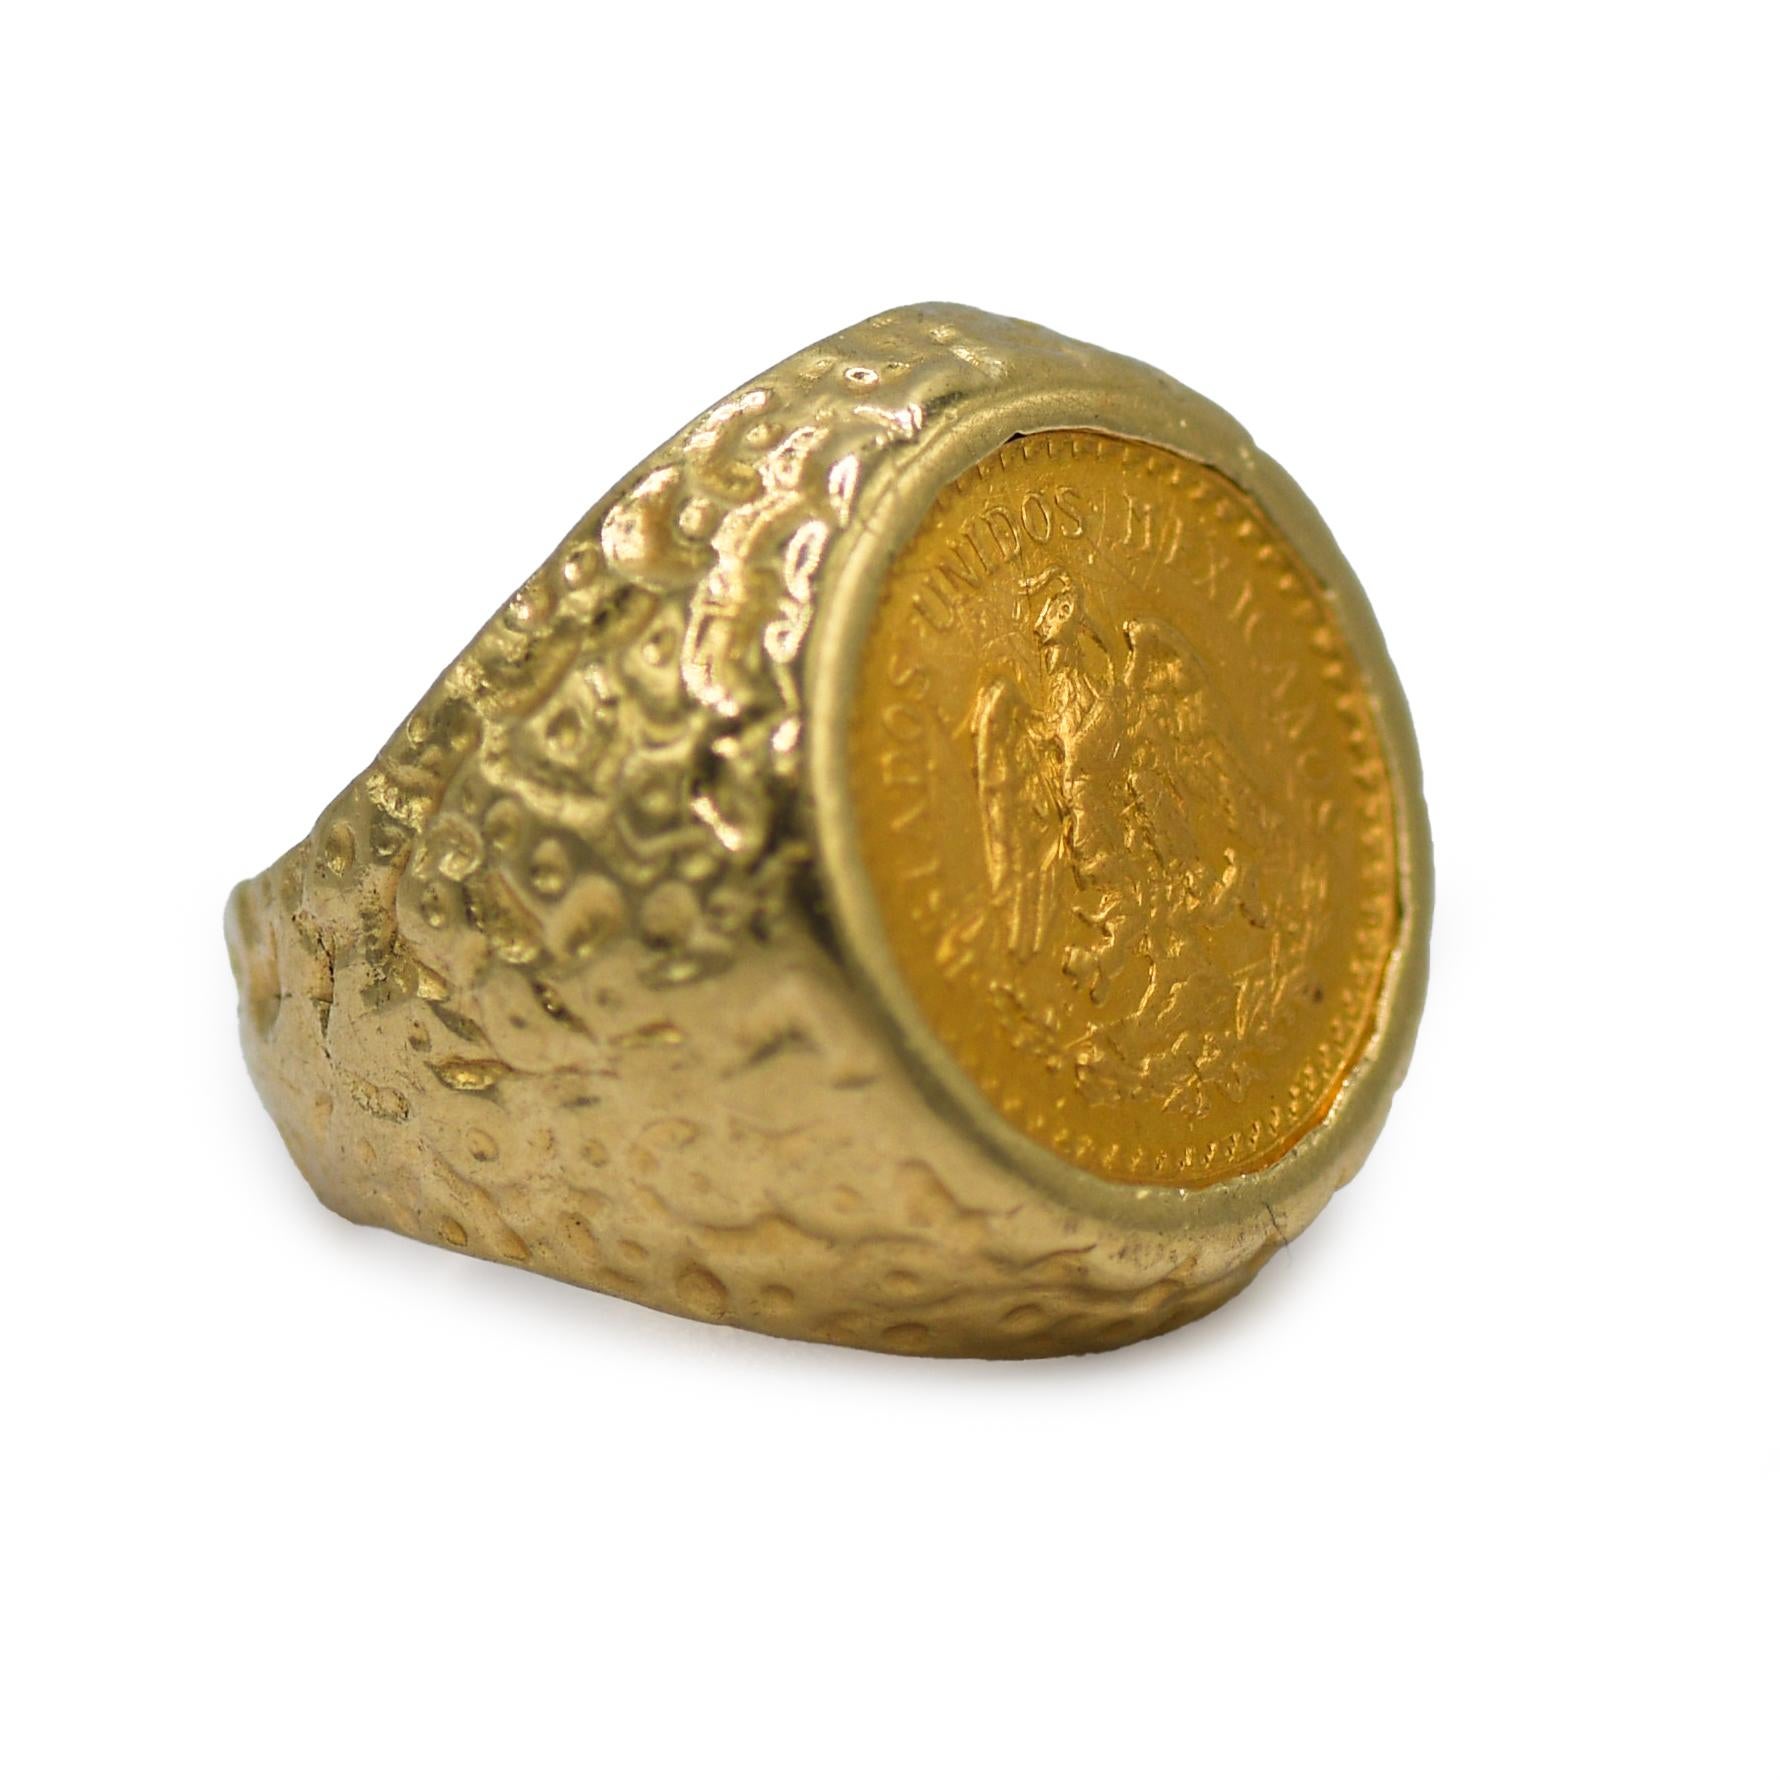 14K Yellow Gold 2.5 Pesos Coin Ring

Introducing our stunning 14K Yellow Gold 2.5 Pesos Coin Ring – a masterpiece of elegance and craftsmanship that beautifully blends rich history with modern sophistication. This exquisite piece is designed to